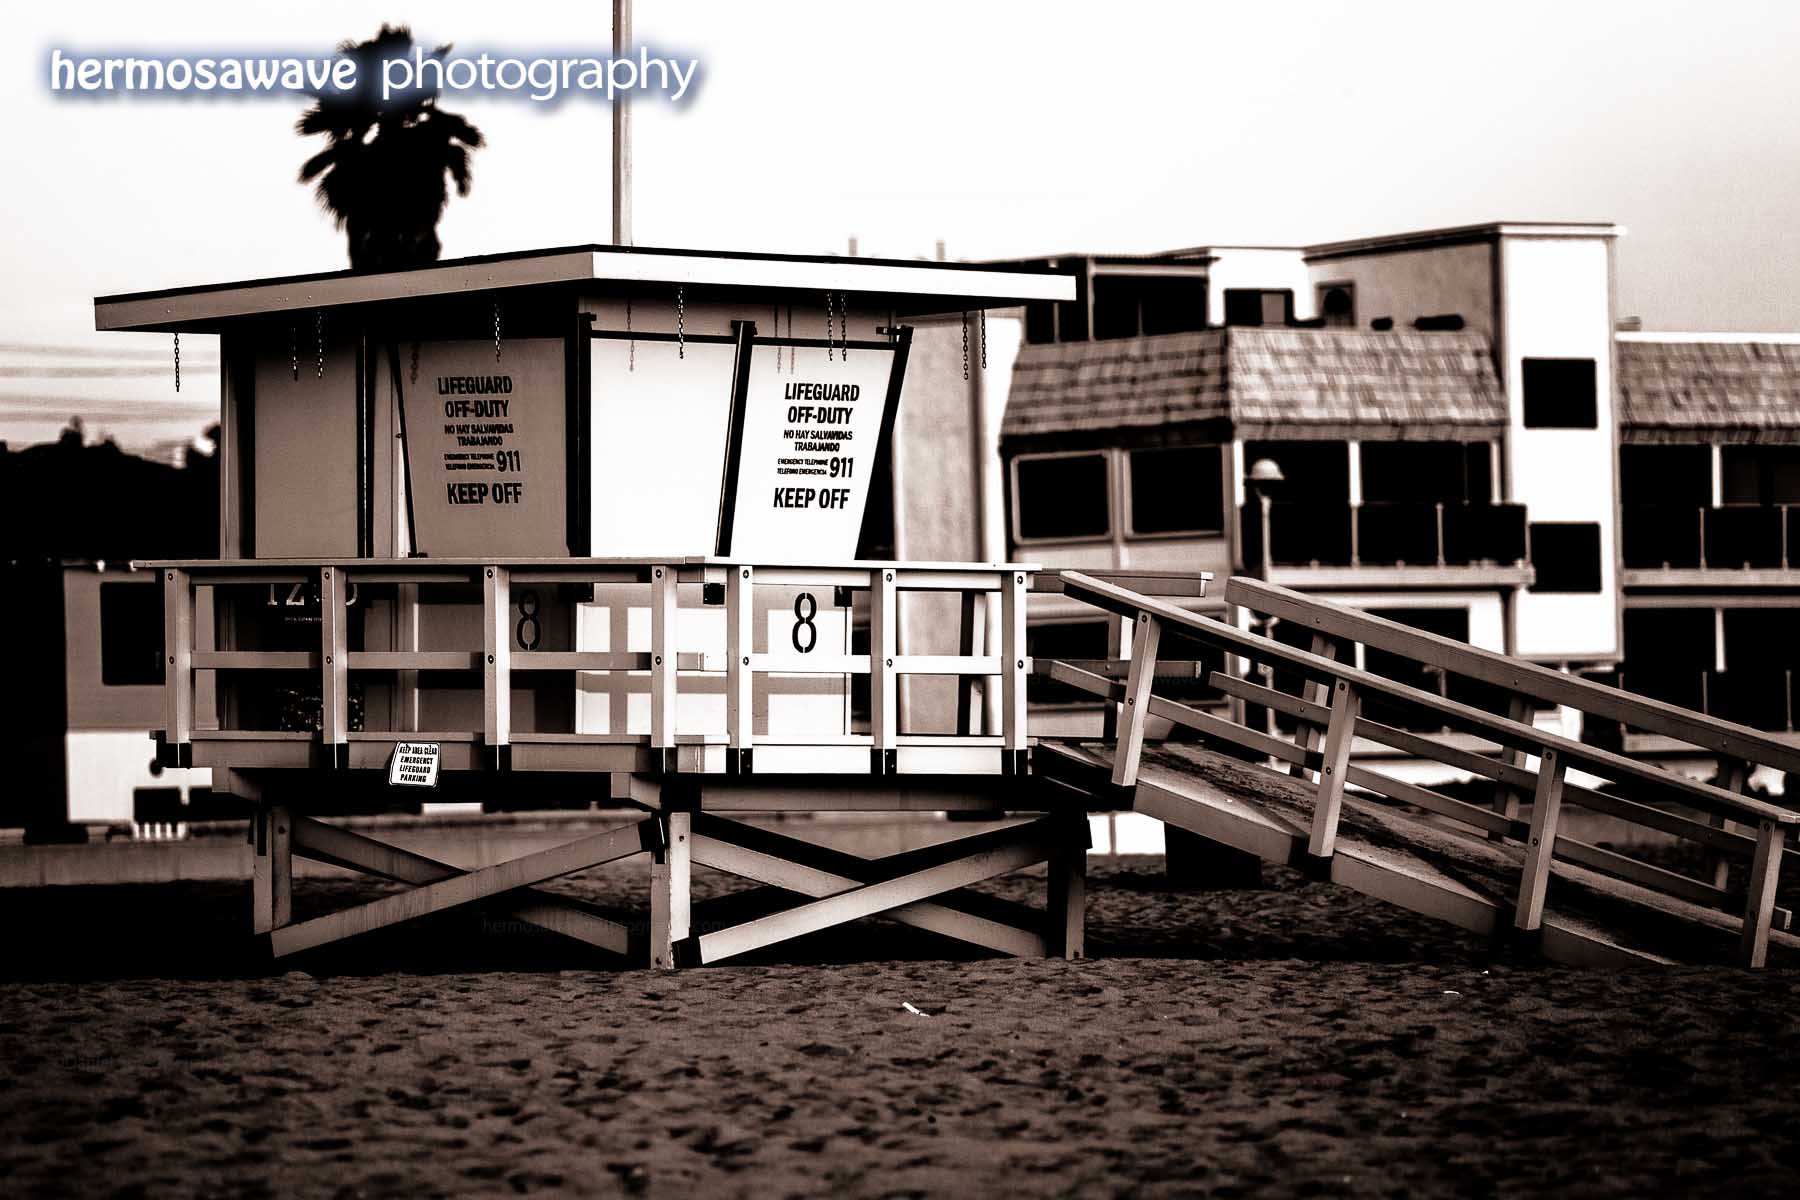 8th St. Lifeguard Tower